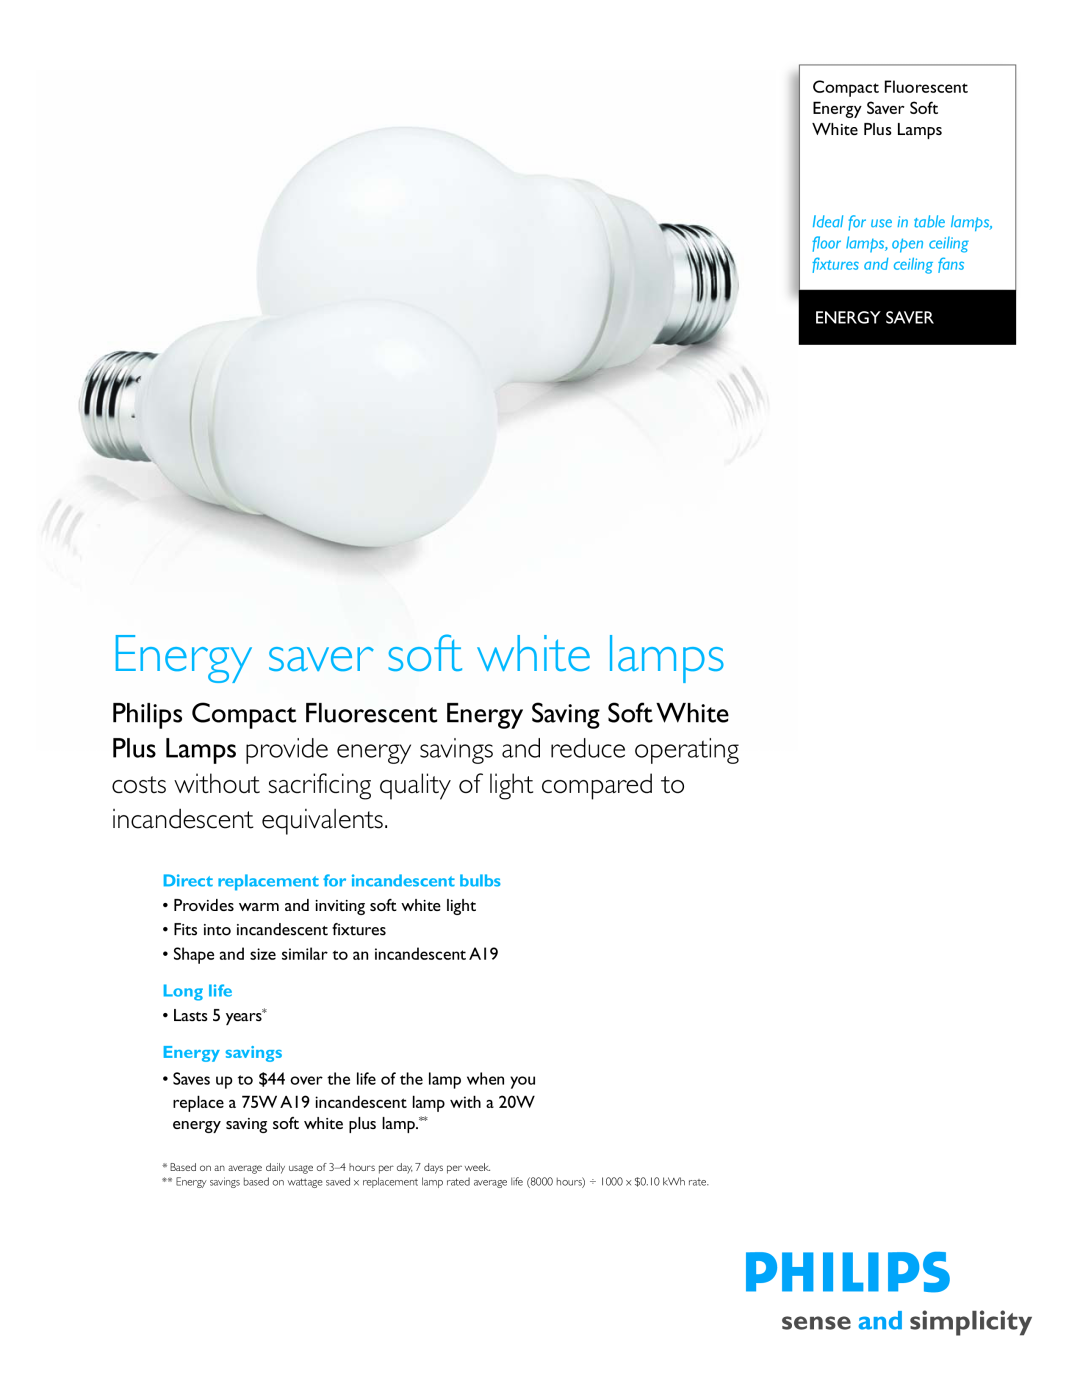 Philips P-5777-B manual Energy saver soft white lamps, Direct replacement for incandescent bulbs, Long life, Energy Saver 